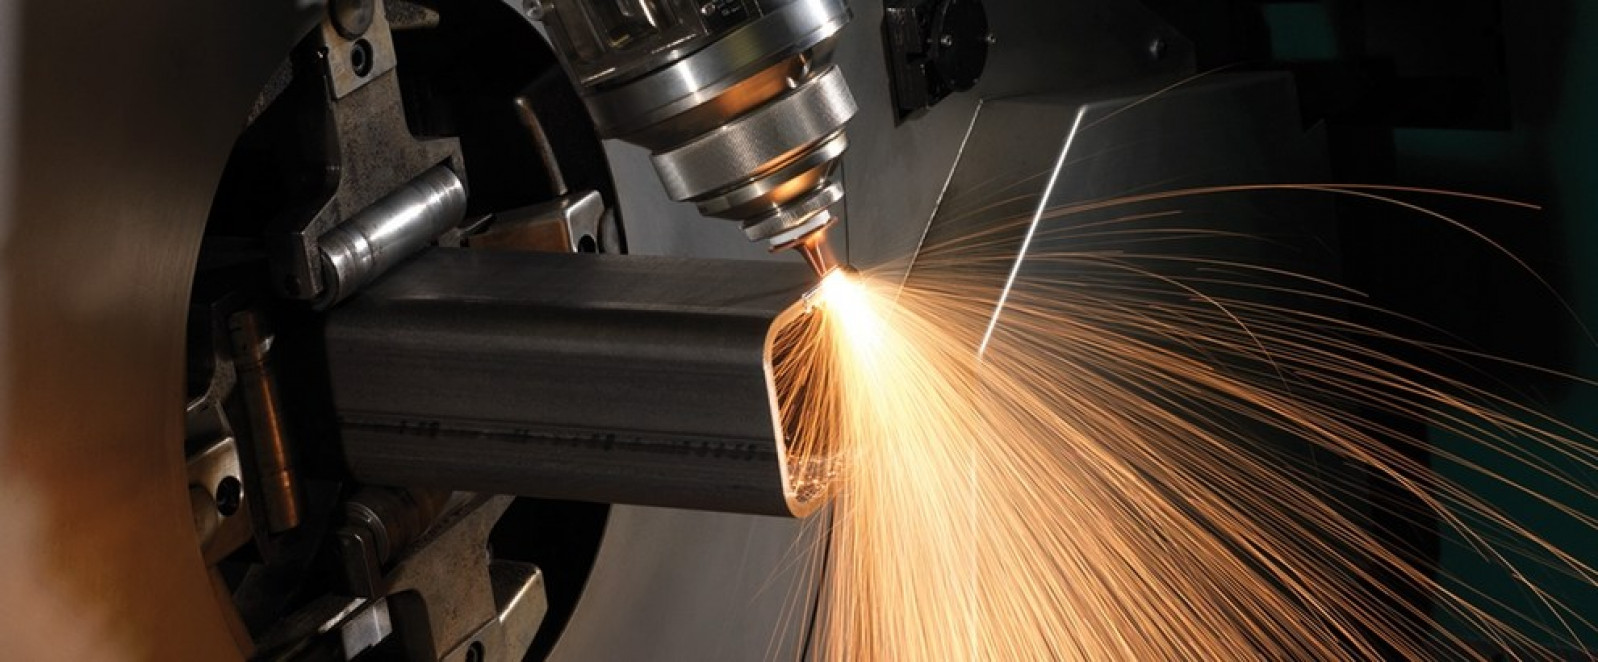 SSC Laser cuts through uncertainty by investing in future